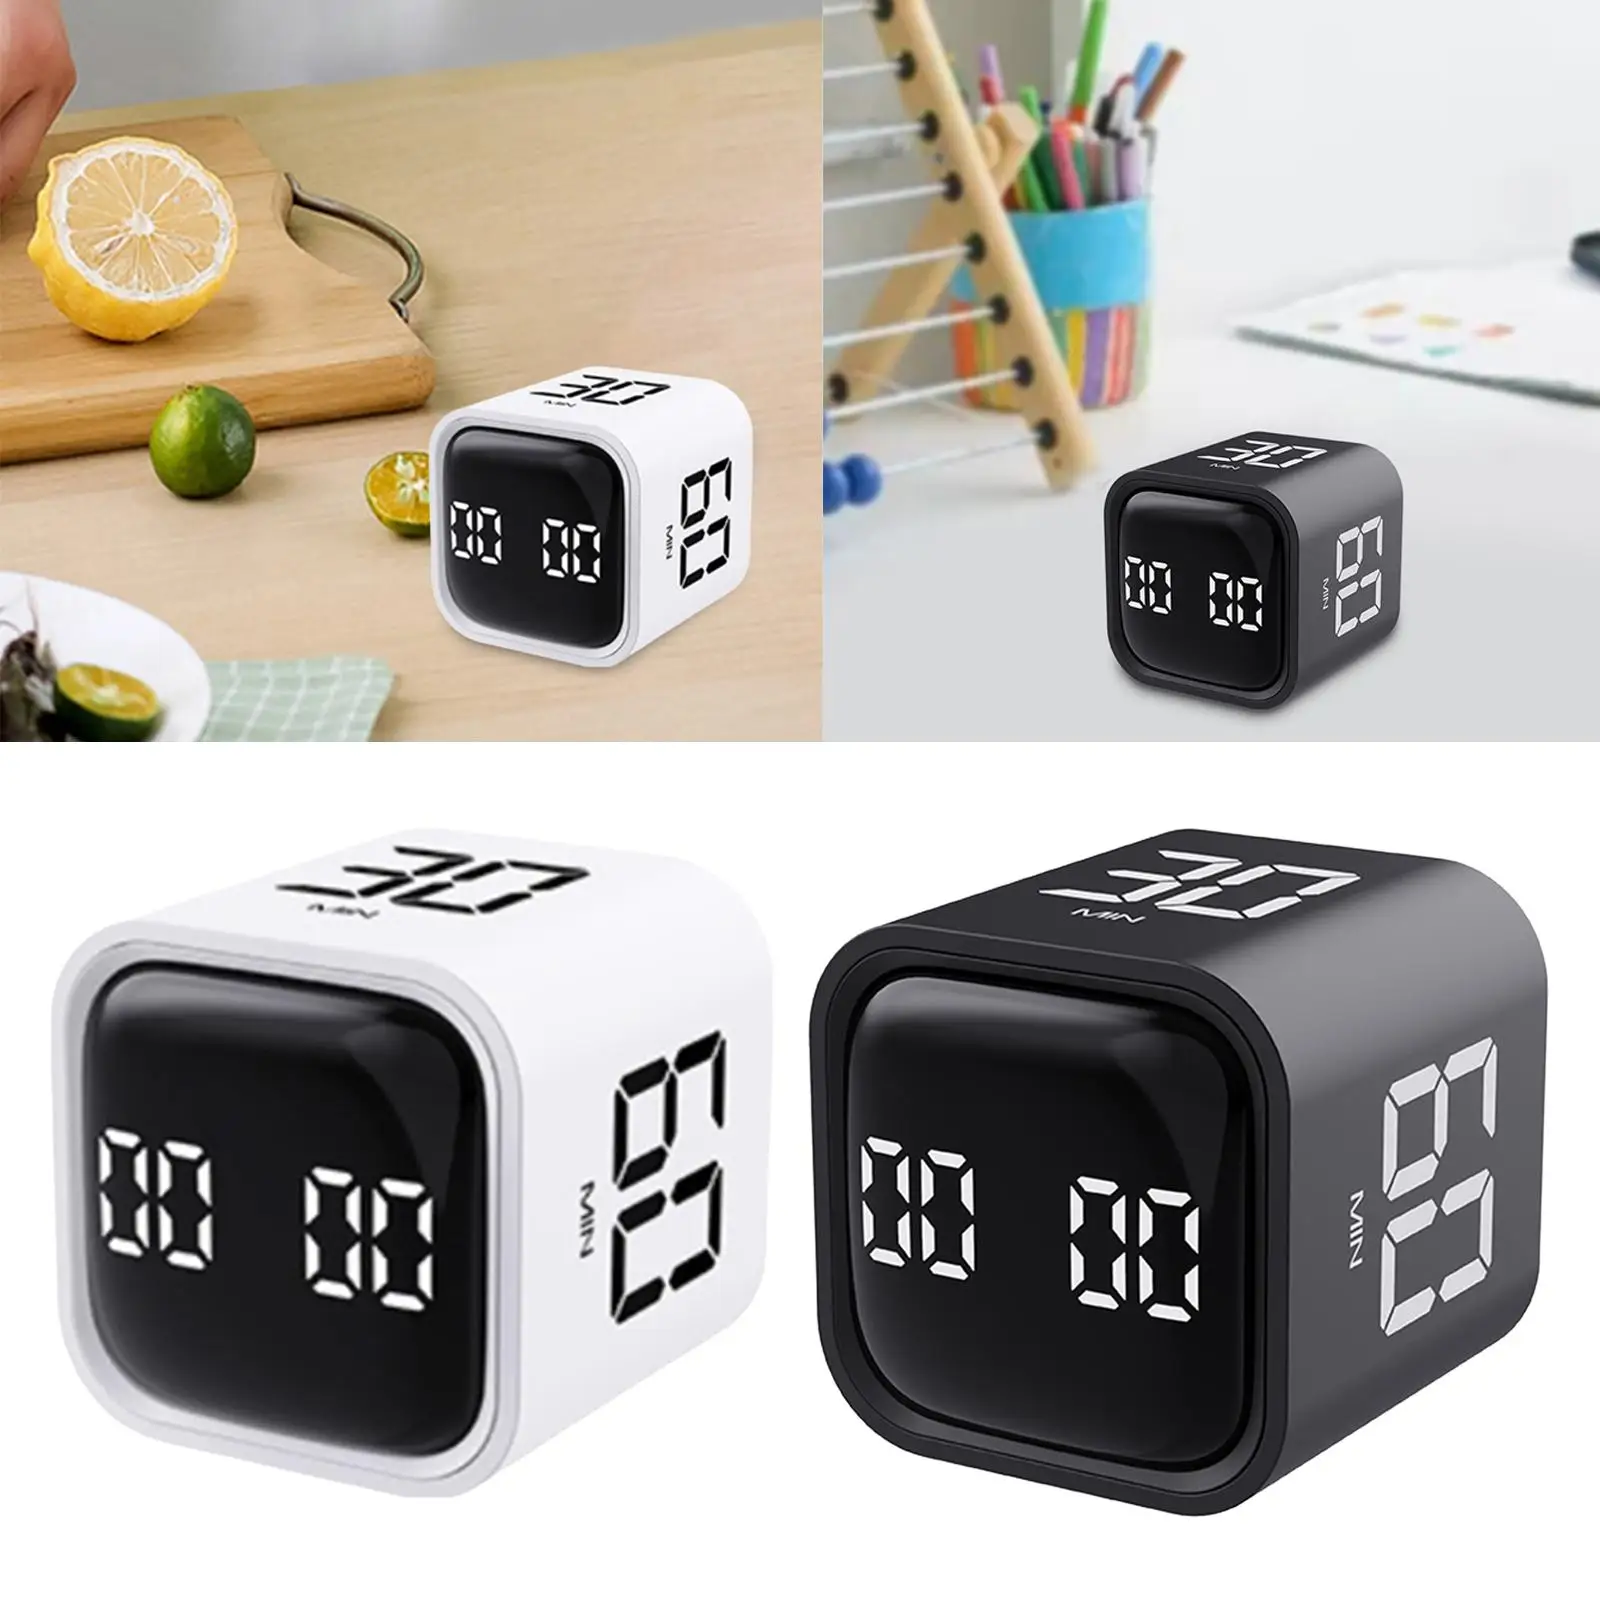 Cube Timers for Kids, Gravity Game Timer, Kitchen Timer for Cooking, Work,